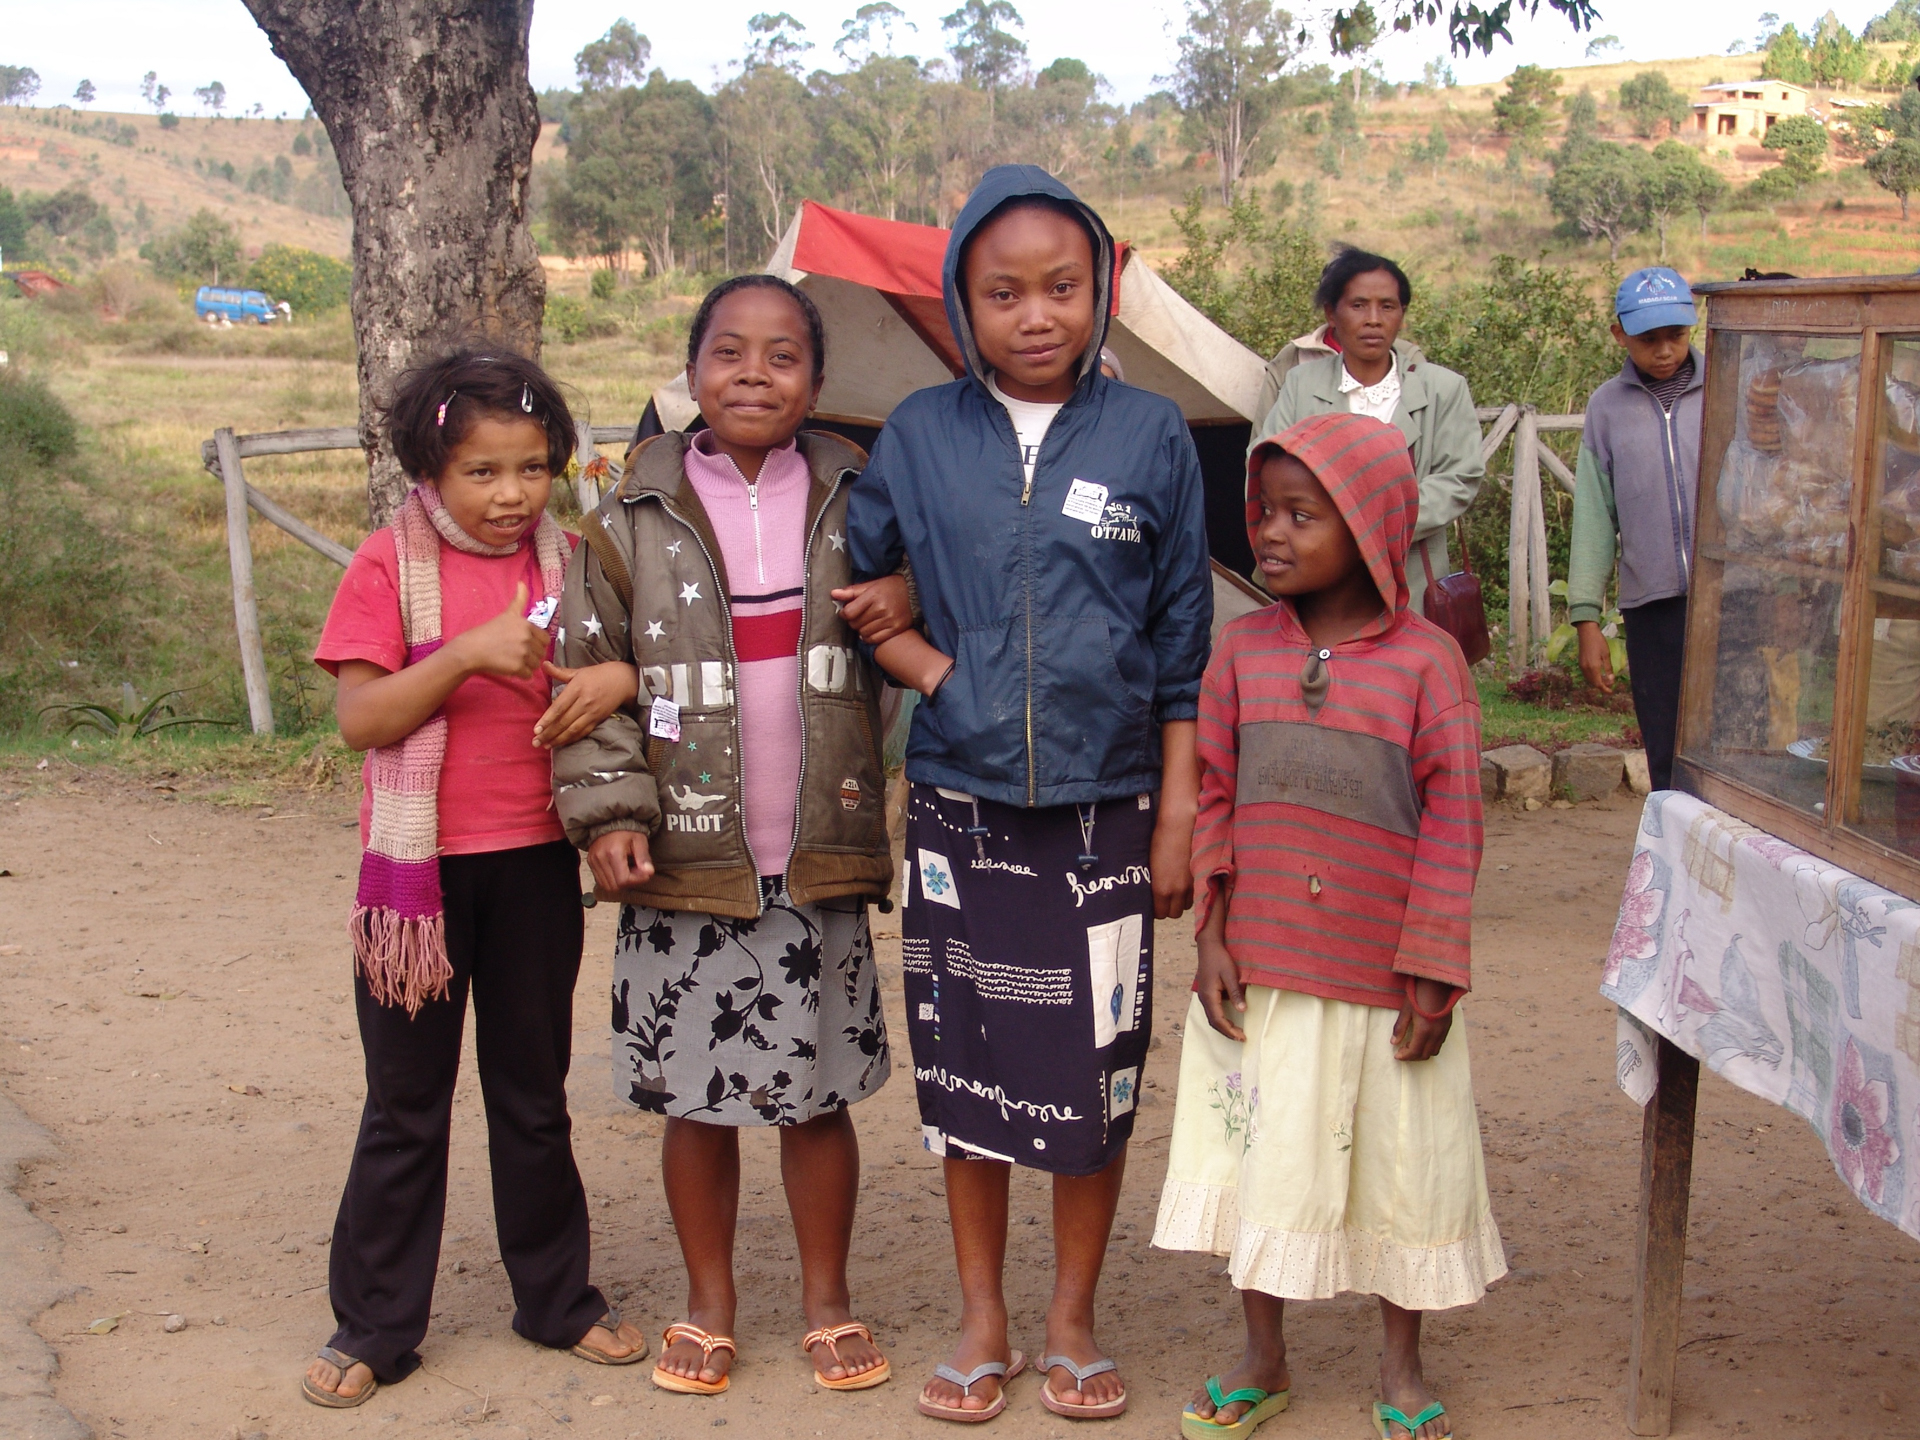 Group of women in Le Triomphe's Children's orphanage in Madagascar